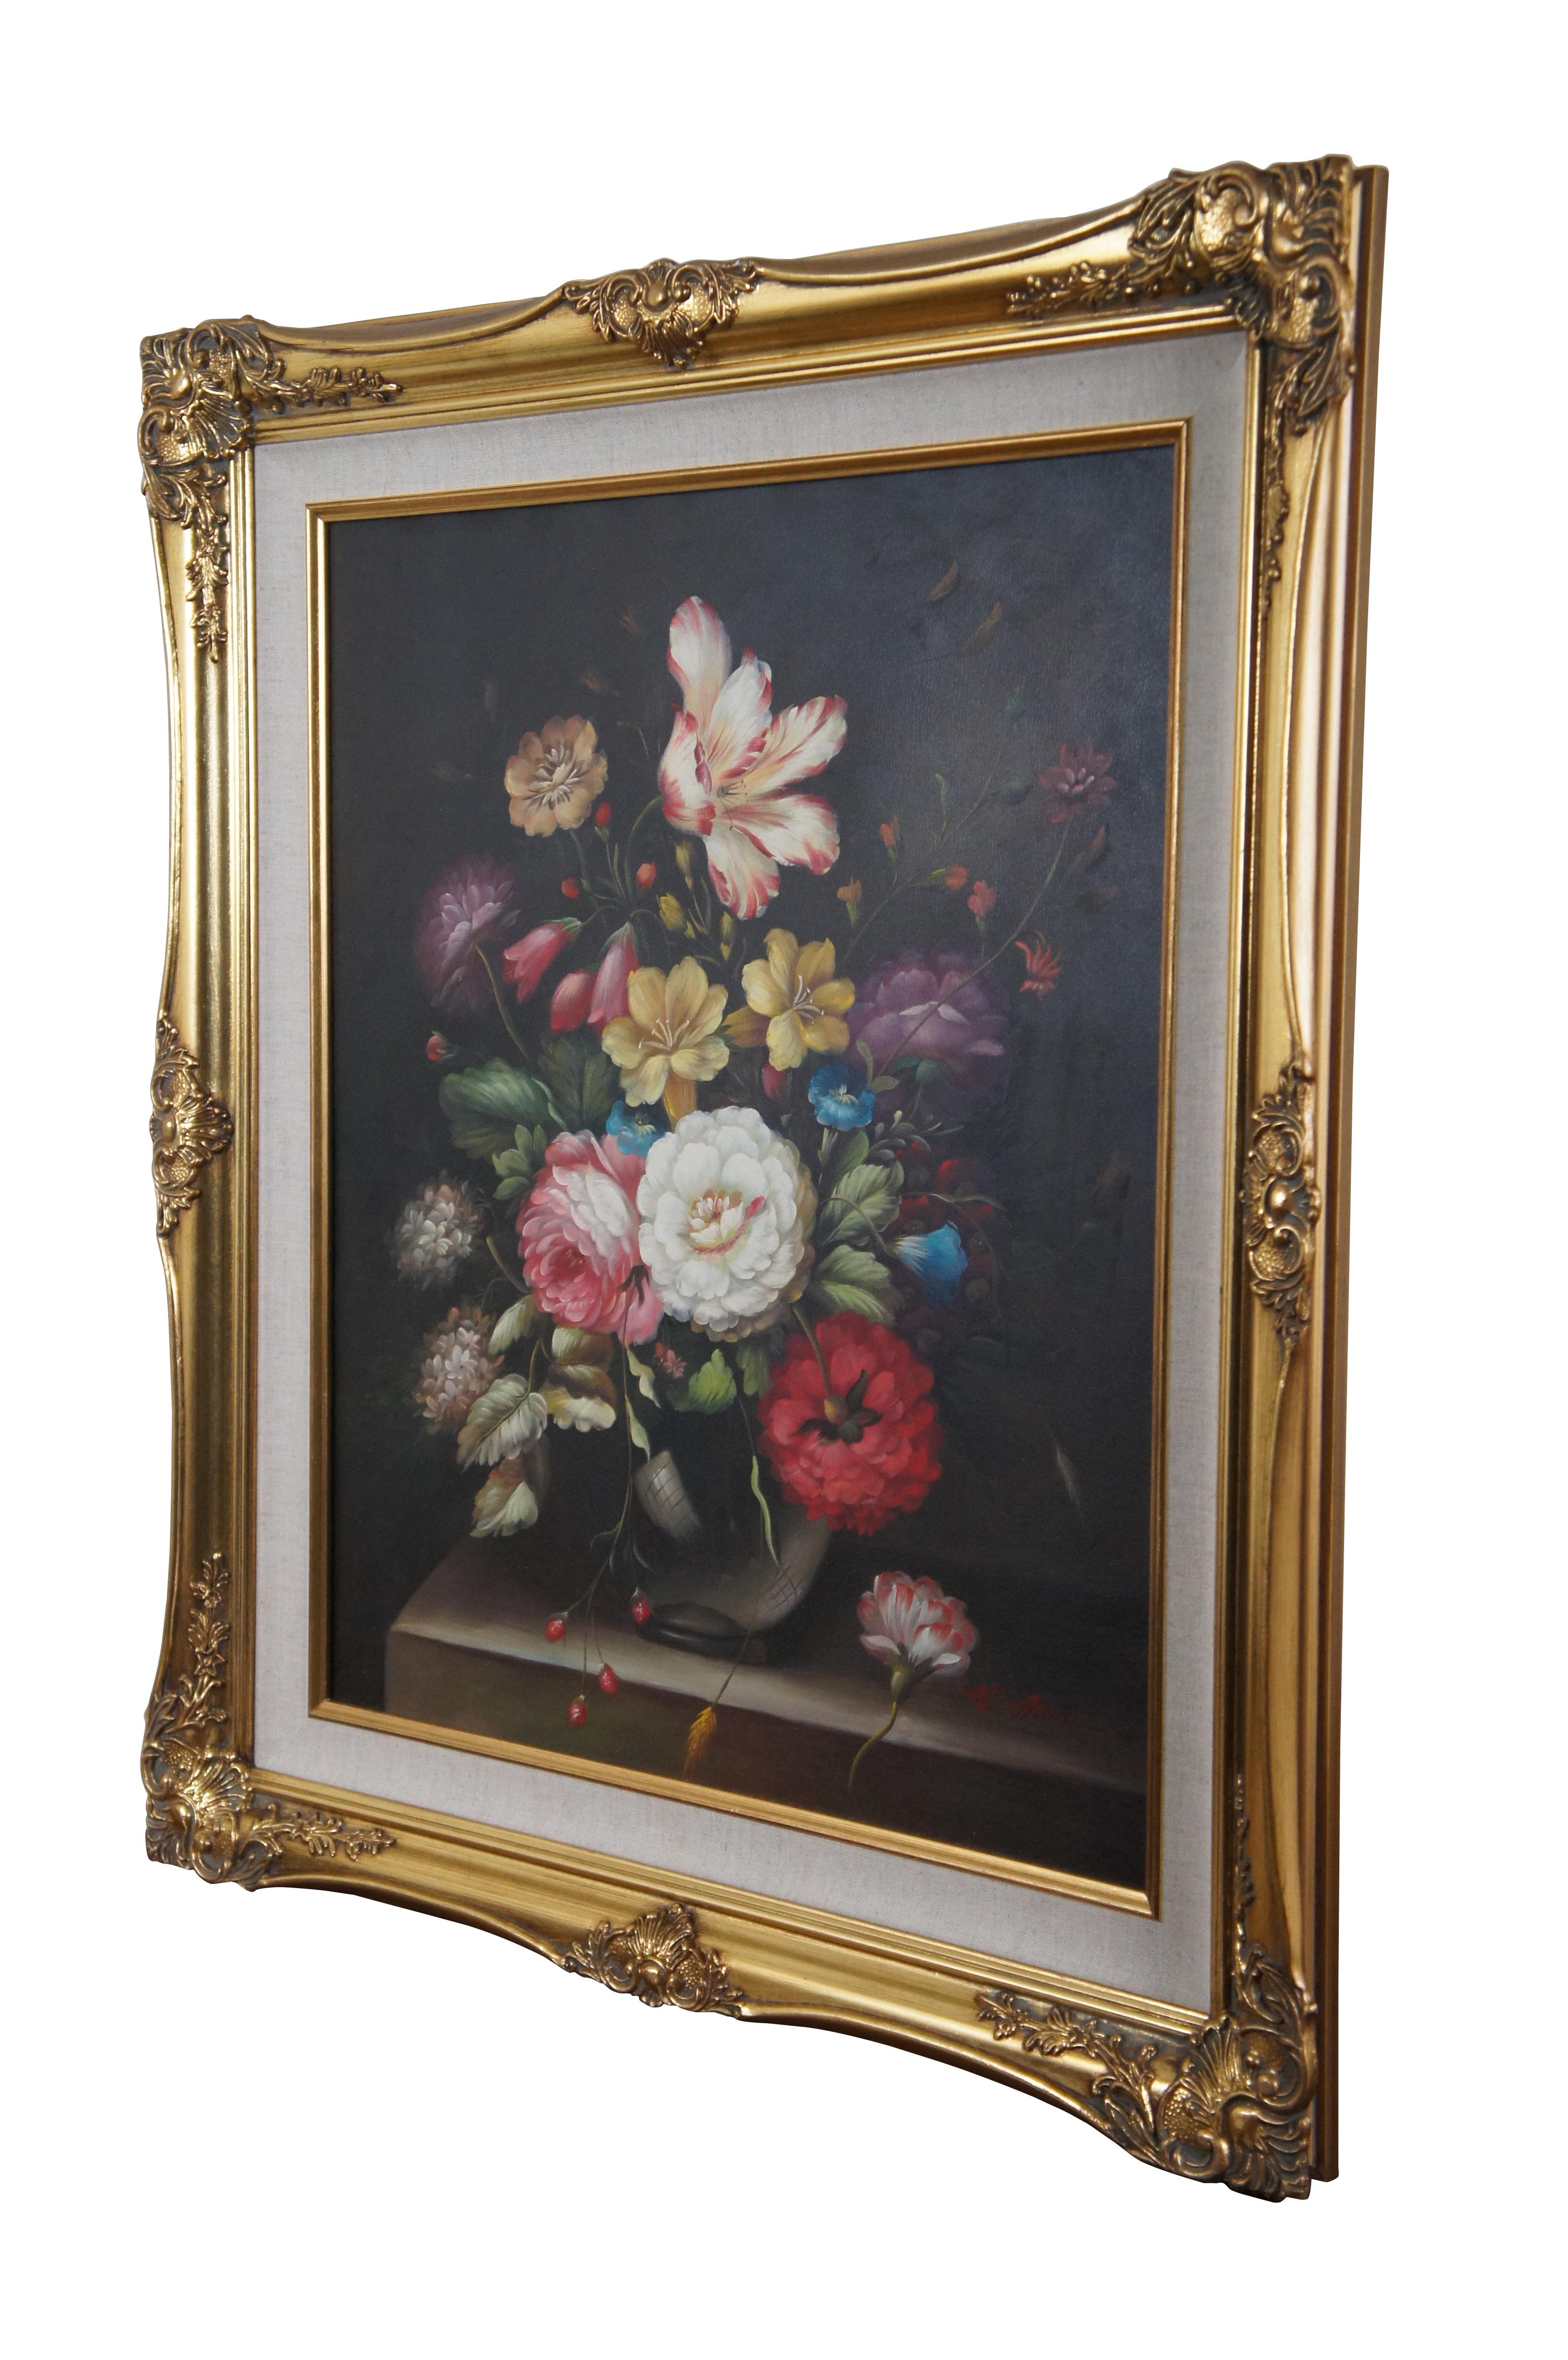 Vintage floral still life oil painting on canvas featuring a colorful bouquet of flowers in a vase on a table.  Signed lower right M Aaron.  Framed in ornate gold frame.

DIMENSIONS

27